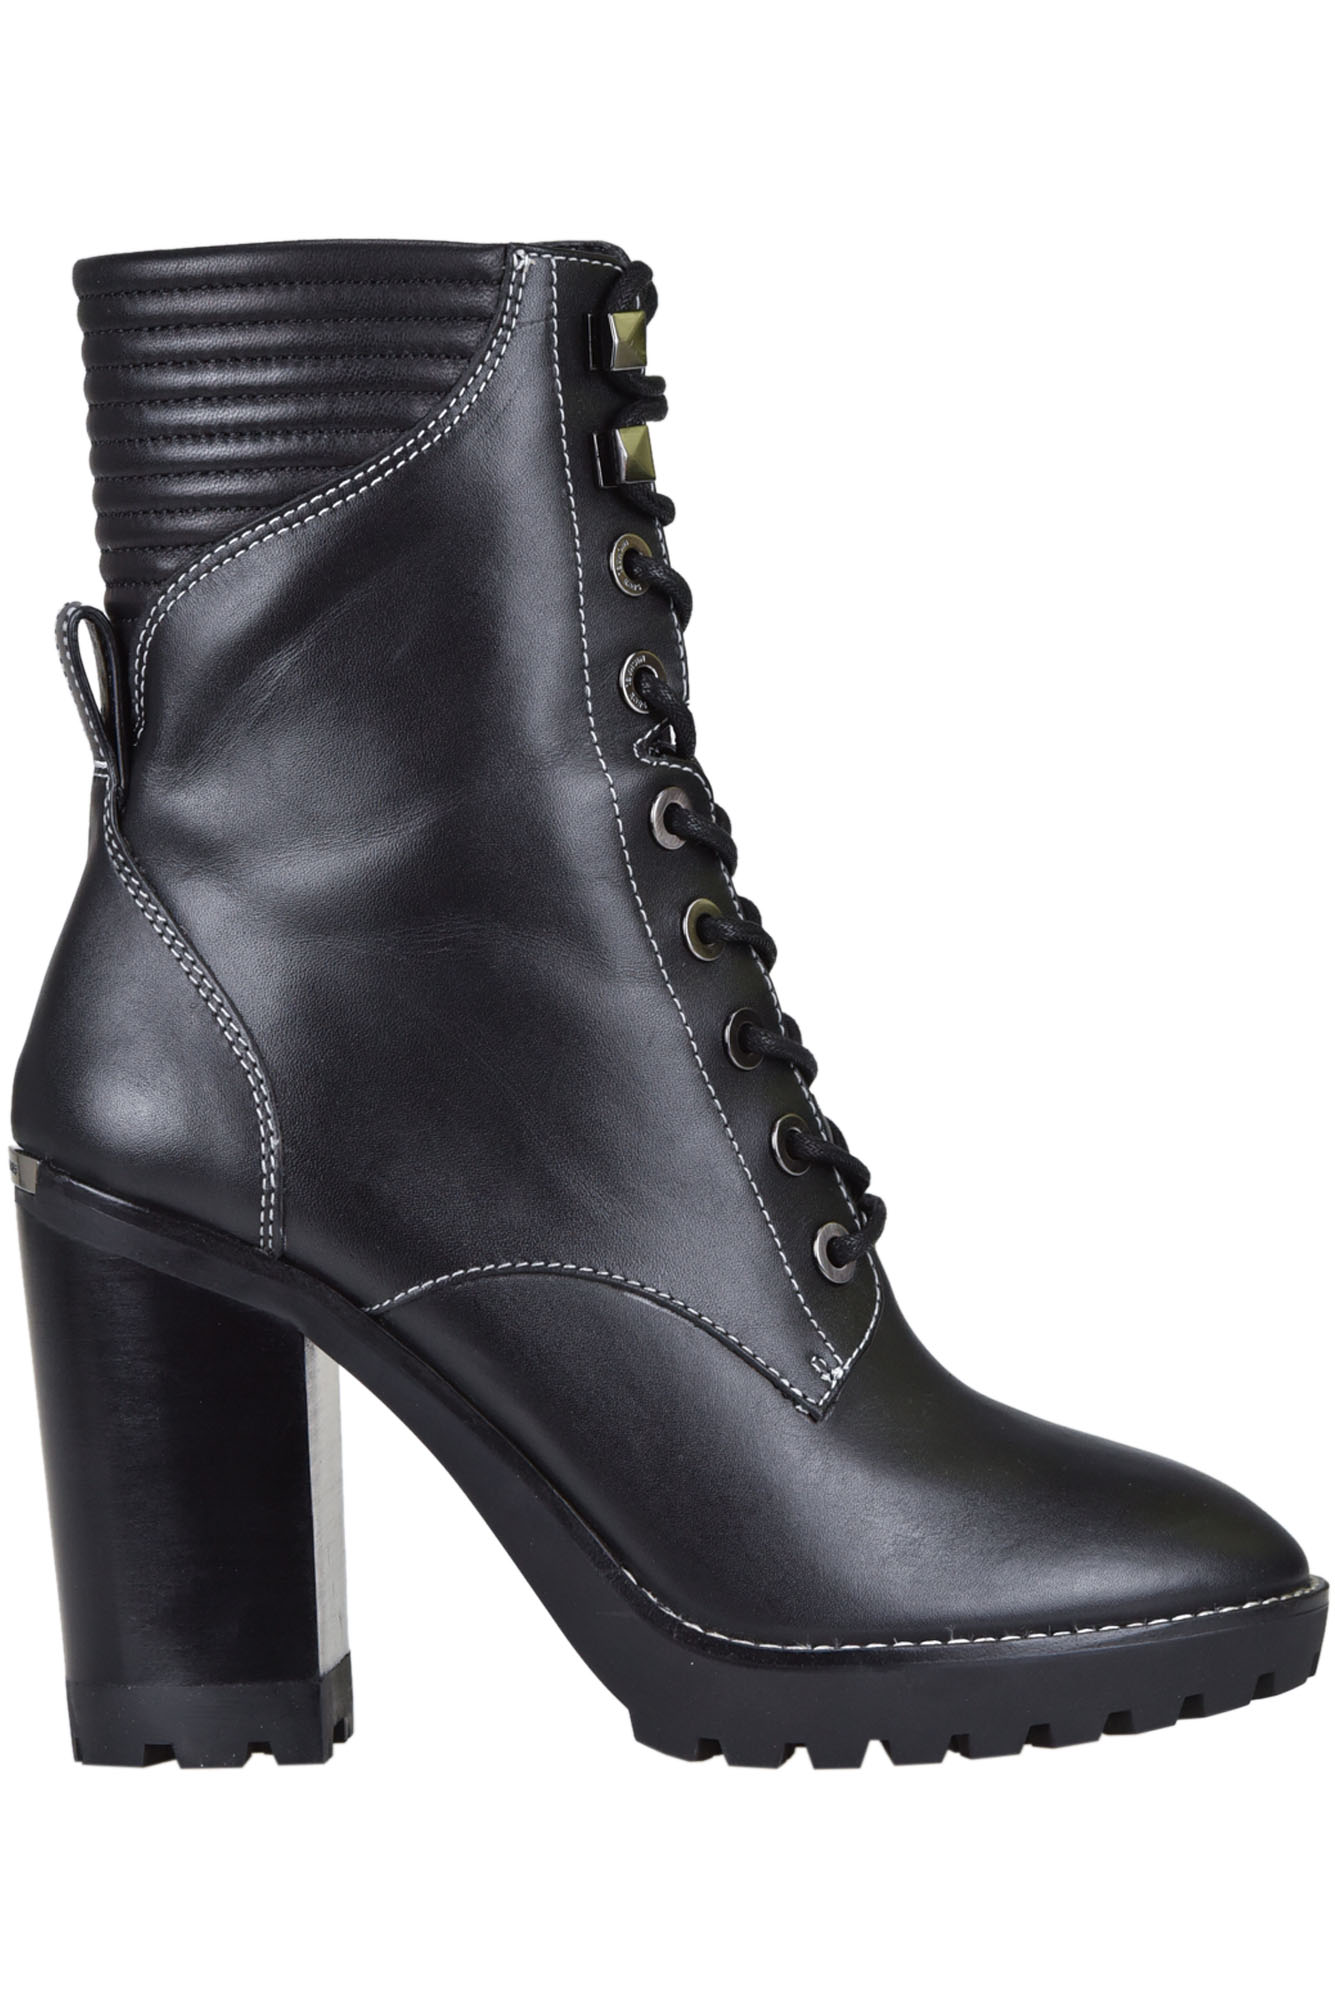 Bastian Lace Up Ankle Boots